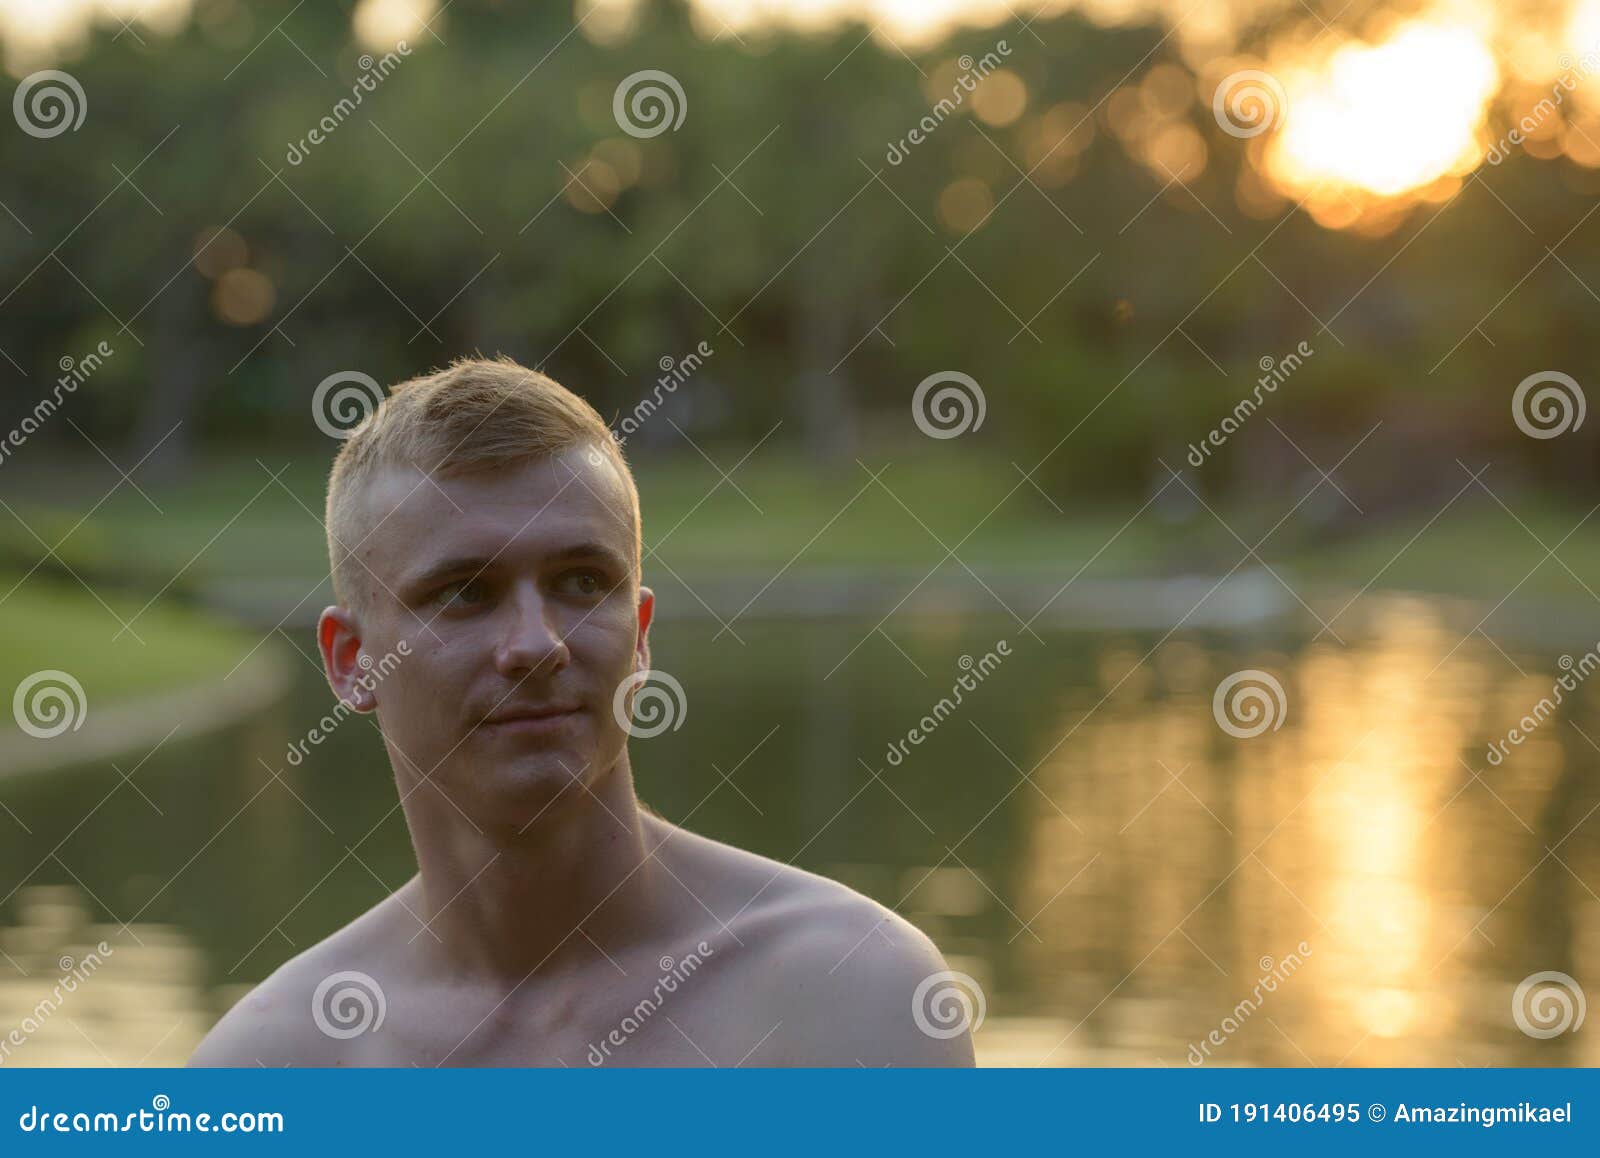 Shirtless Guy with Blond Hair - wide 5